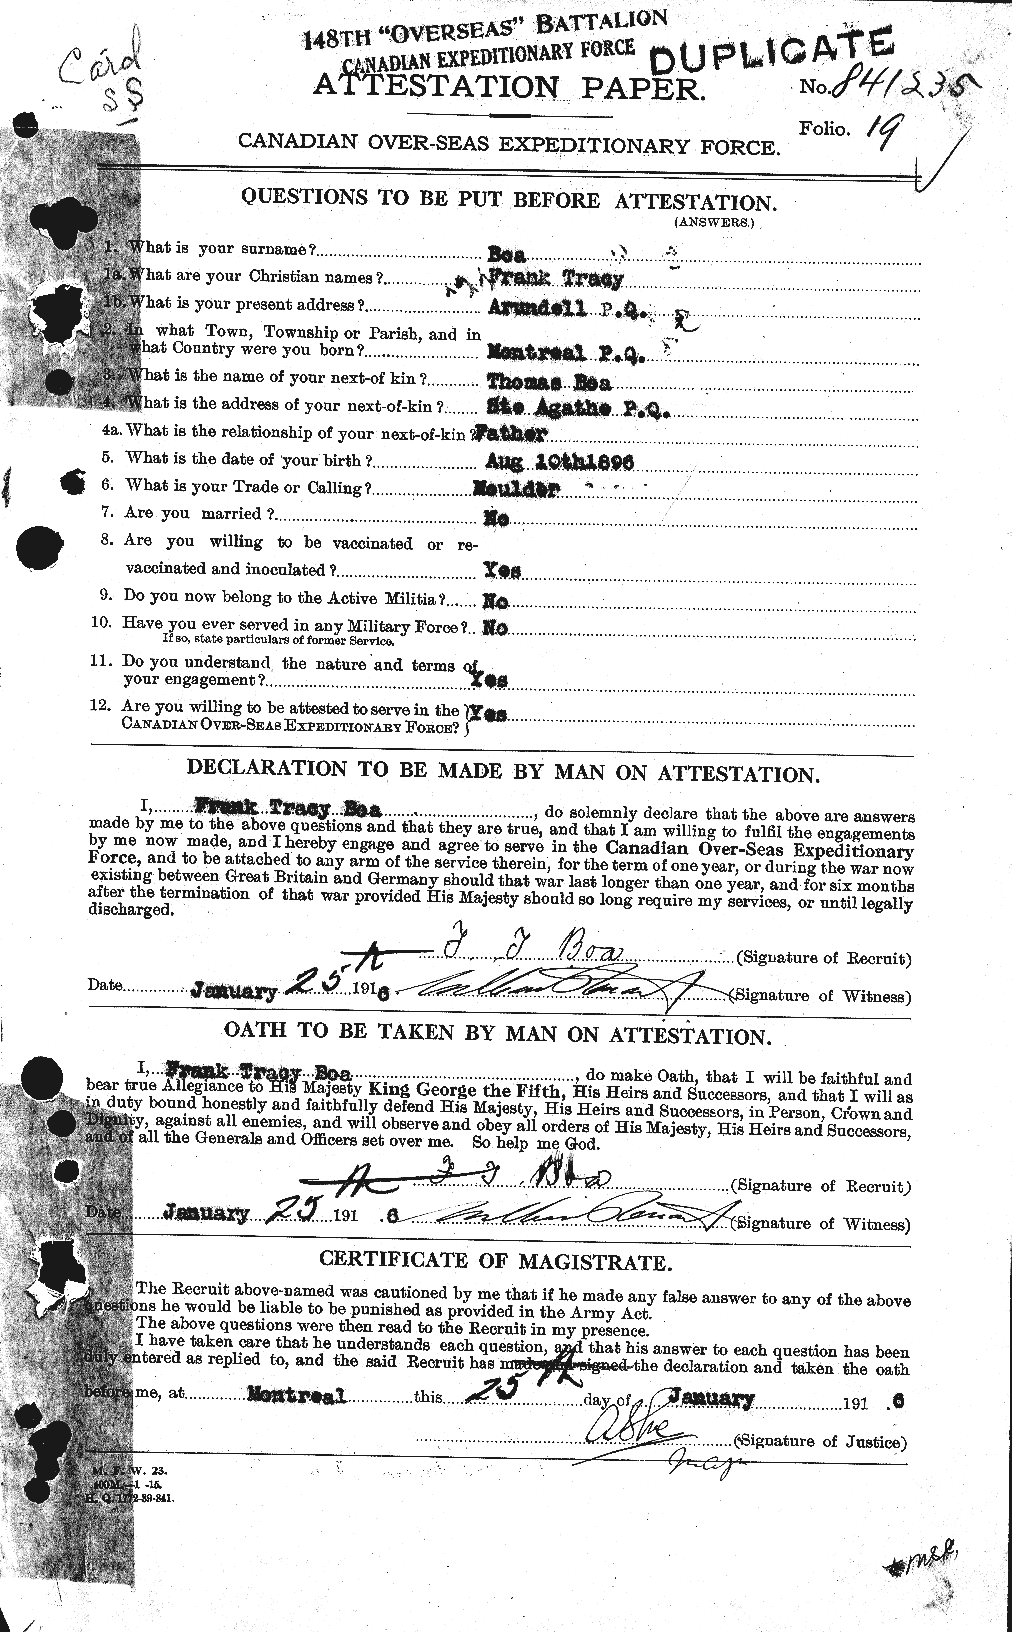 Personnel Records of the First World War - CEF 247354a